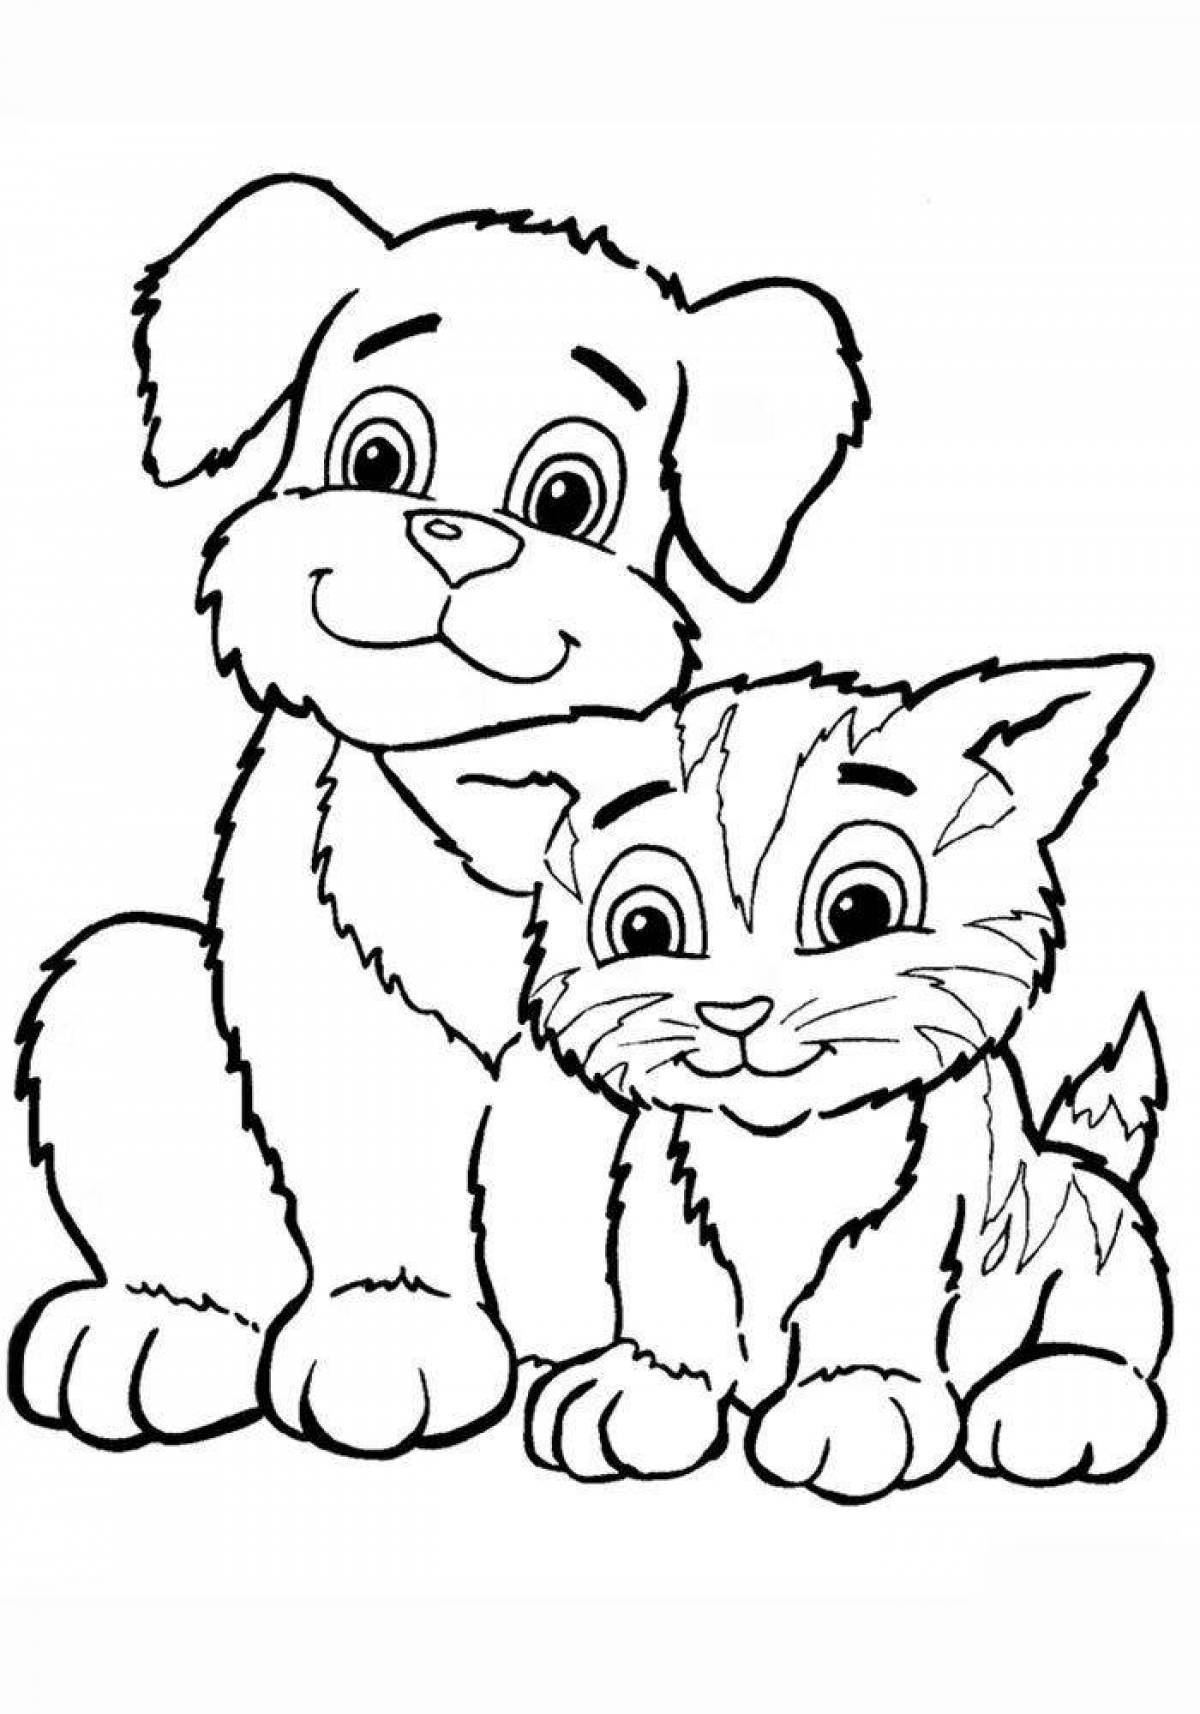 Sweet coloring book for girls dogs kittens